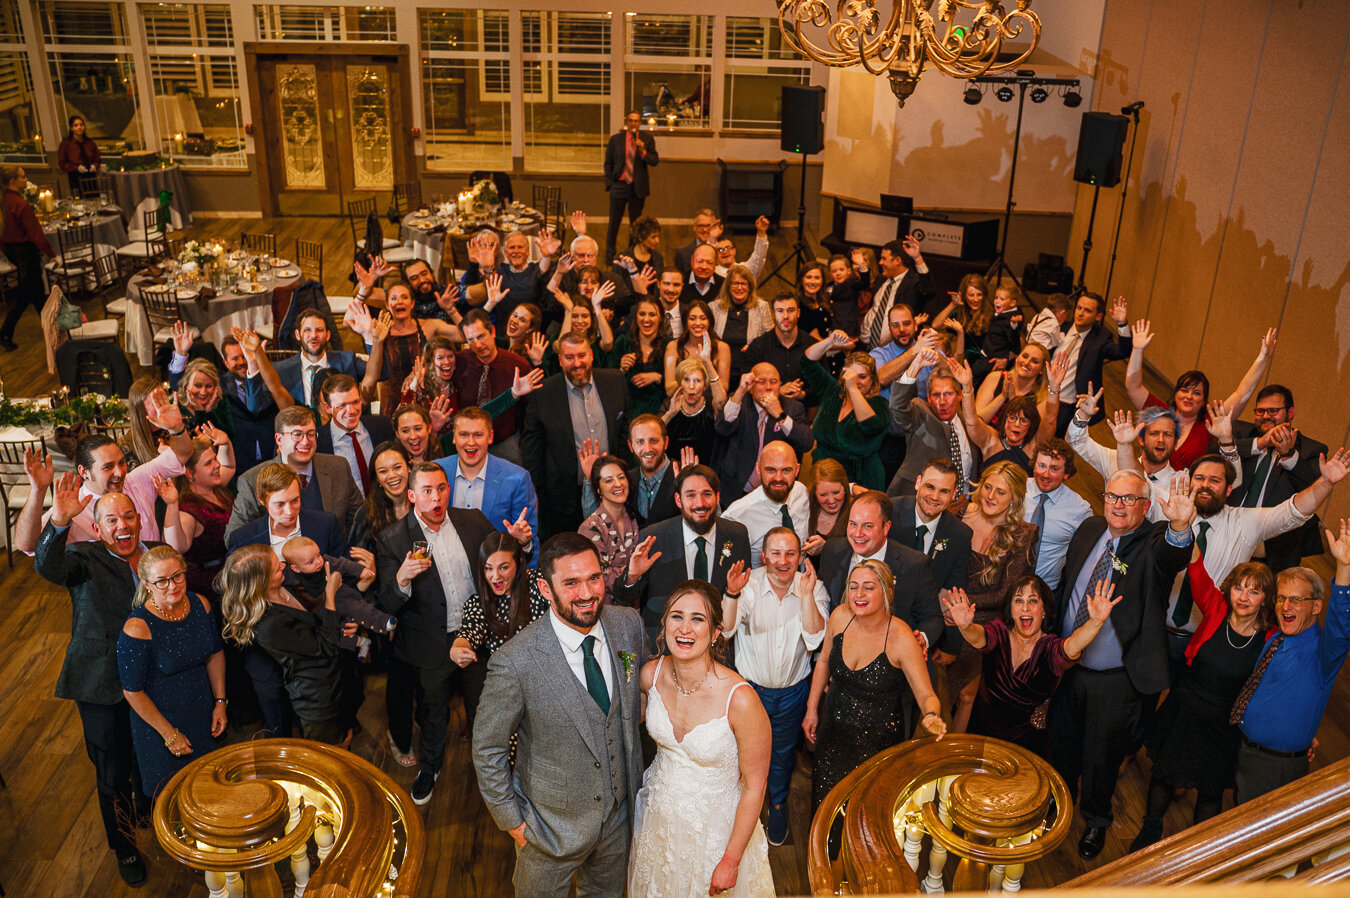 Proper planning and enough photo/video coverage ensures we're there to capture gems like this. 
.
.
.
#groupphoto #largeweddings #traditionalweddings #coloradoweddings #denverweddings #fortcollinsweddings #coloradoweddingphotographer #coloradowedding